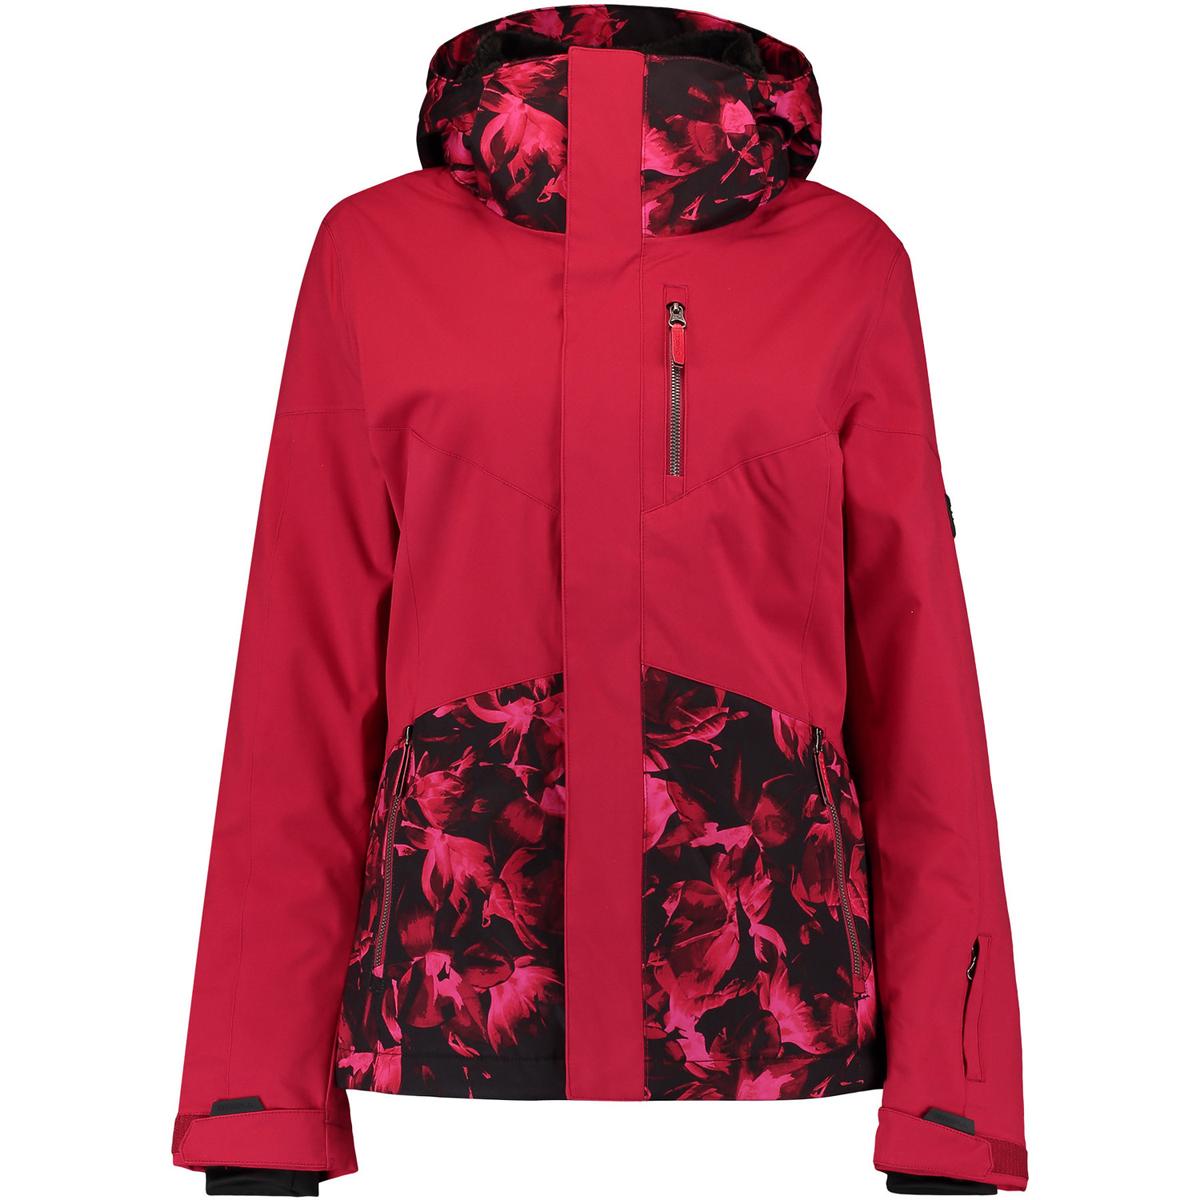 O'Neill Coral Women's Jacket 2021